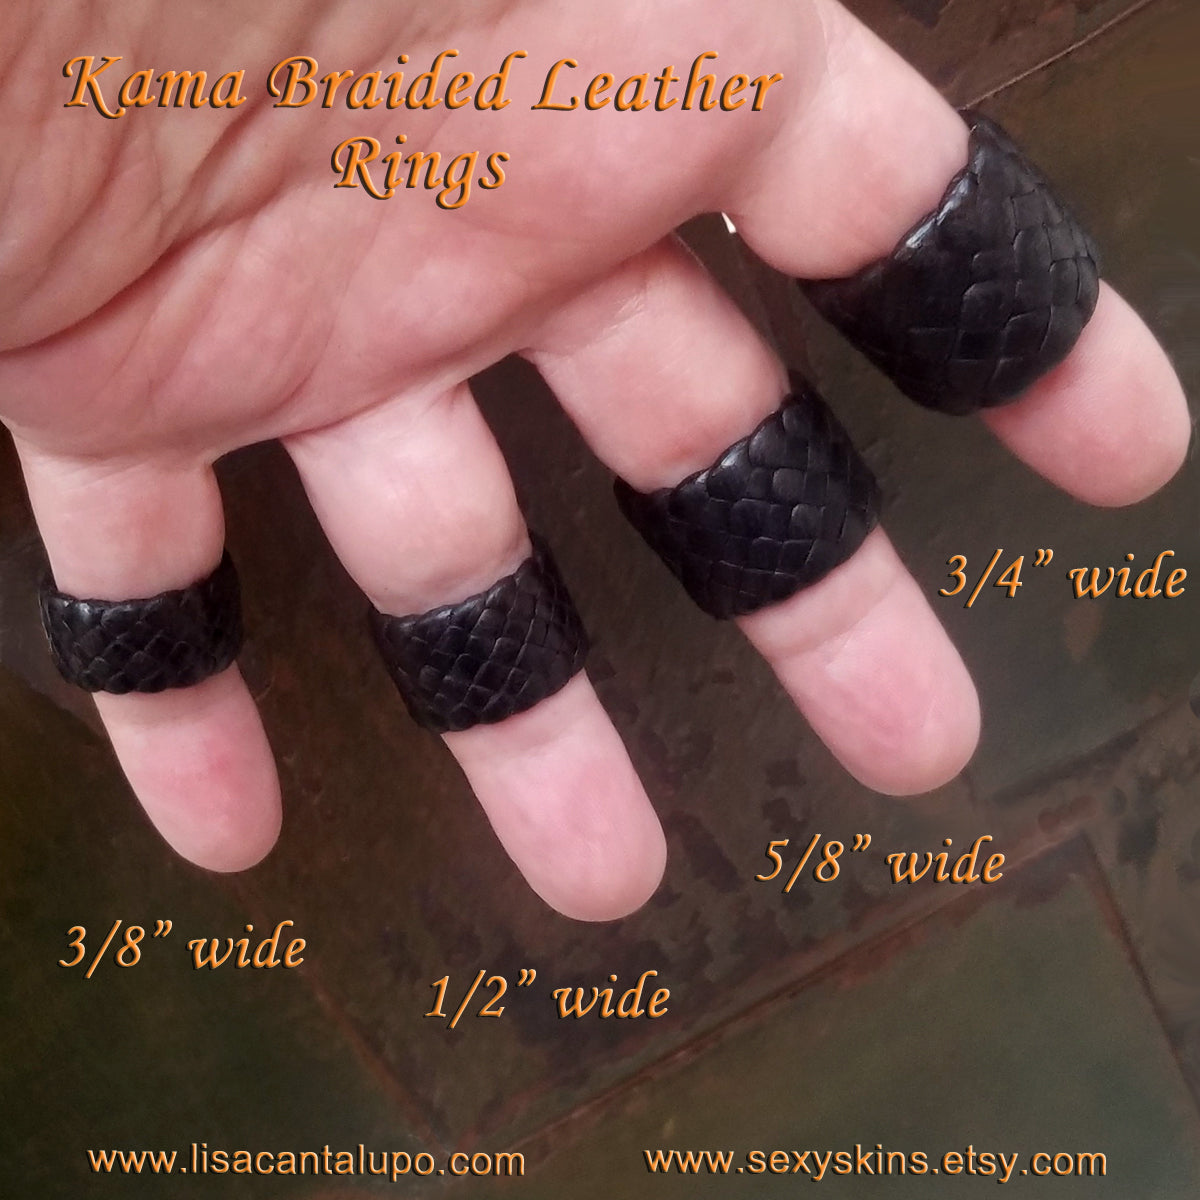 Kama Braided Leather Rings in the available widths; 3/8", 1/2", 5/8", and 3/4" on model